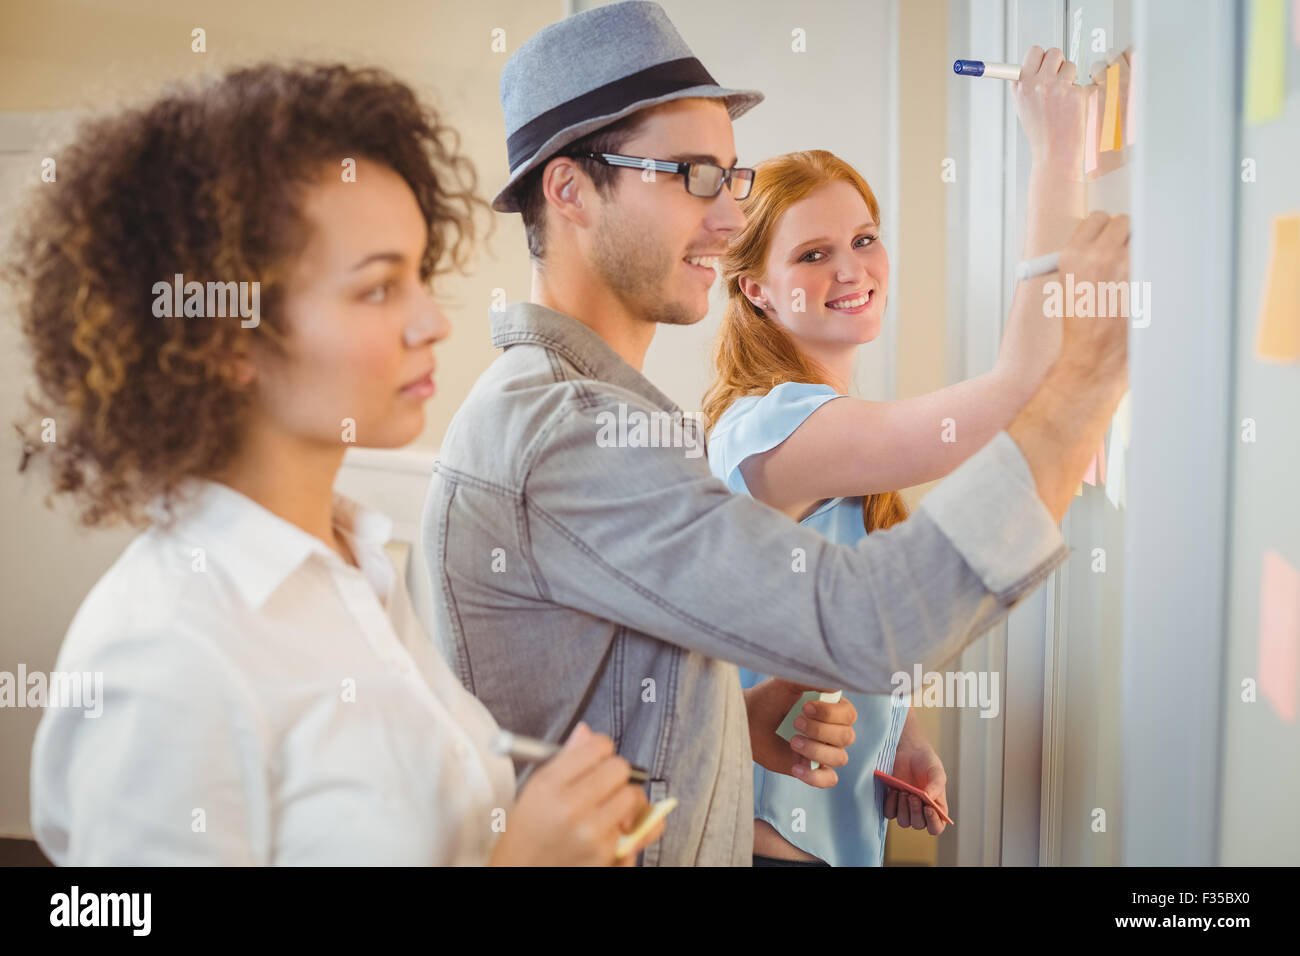 Businesswoman writing on adhesive notes on glass wall with colleagues Stock Photo